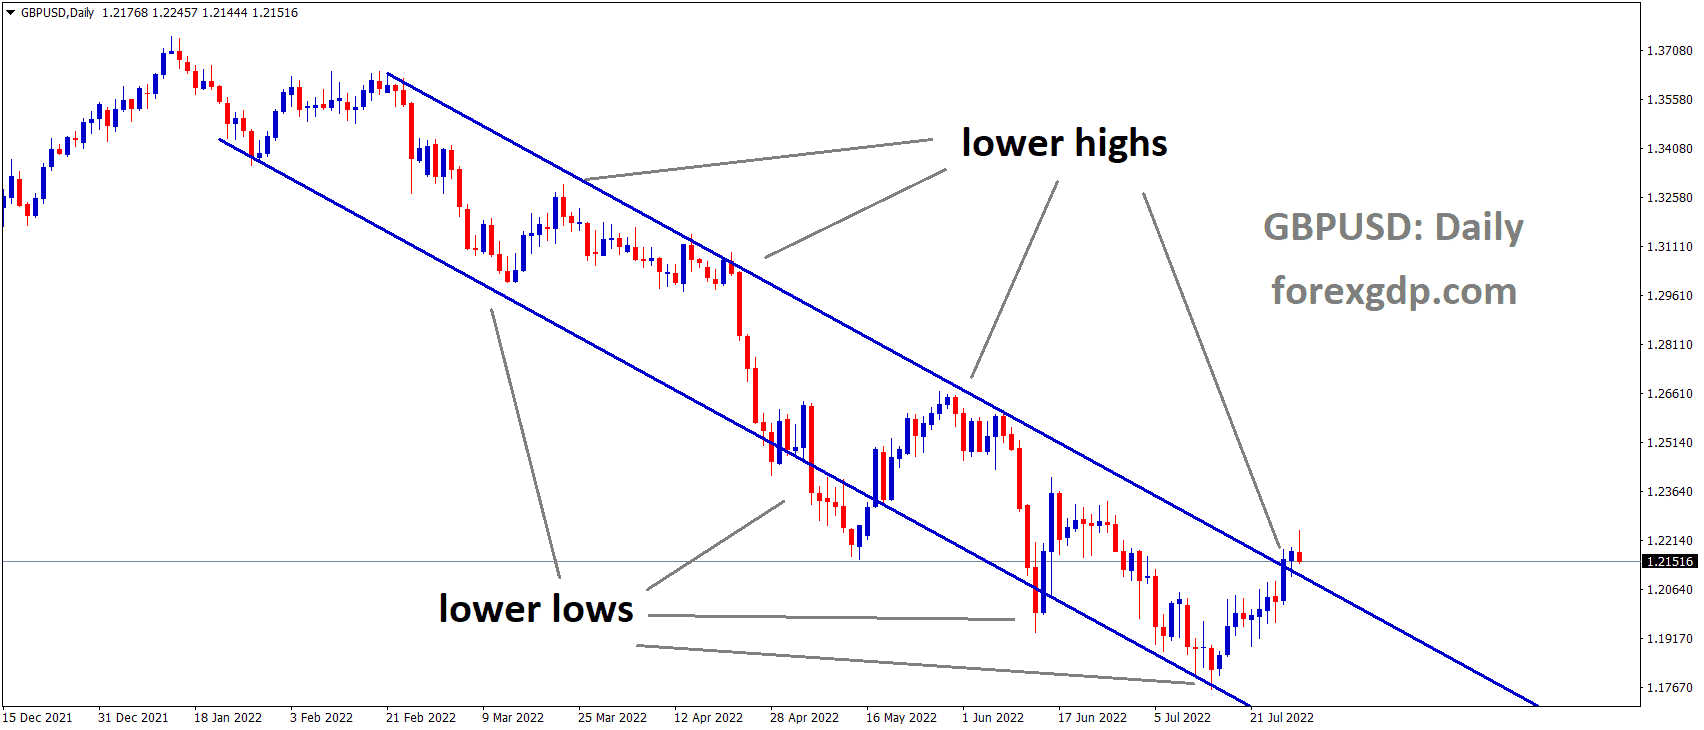 GBPUSD is moving in the Descending channel and the market has fallen from the Lower high area of the channel 4